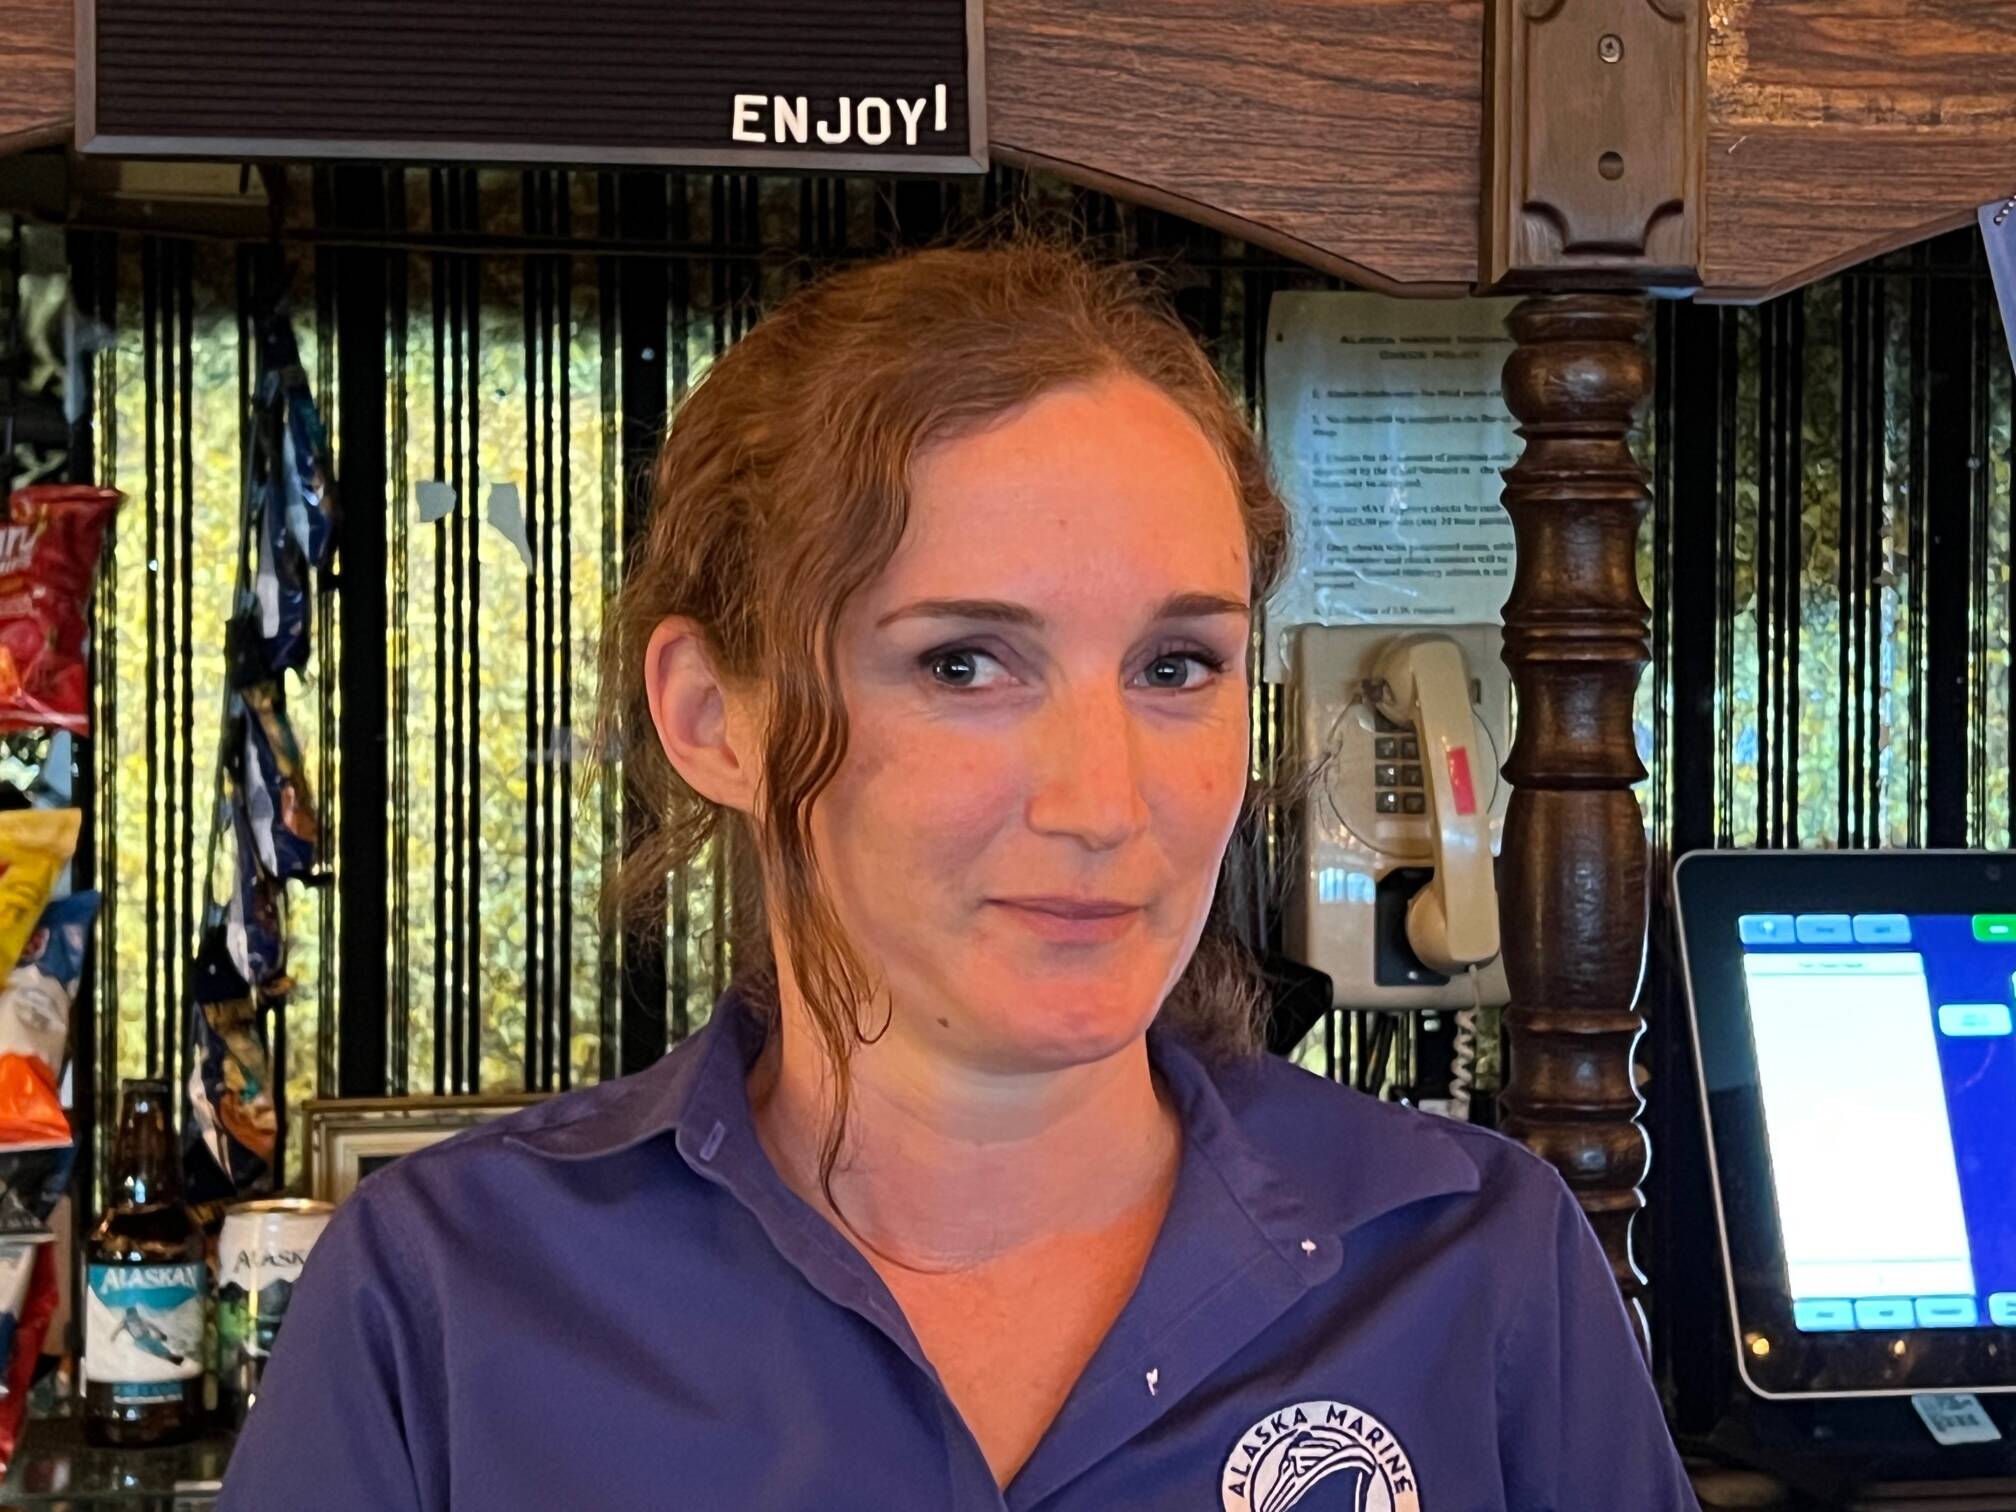 Tending bar is just one of the jobs Amber Geil does as a steward on the Columbia. She also rings up customers in the dining room and cleans staterooms. “We all take on multiple jobs,” she said. (Meredith Jordan / Juneau Empire)